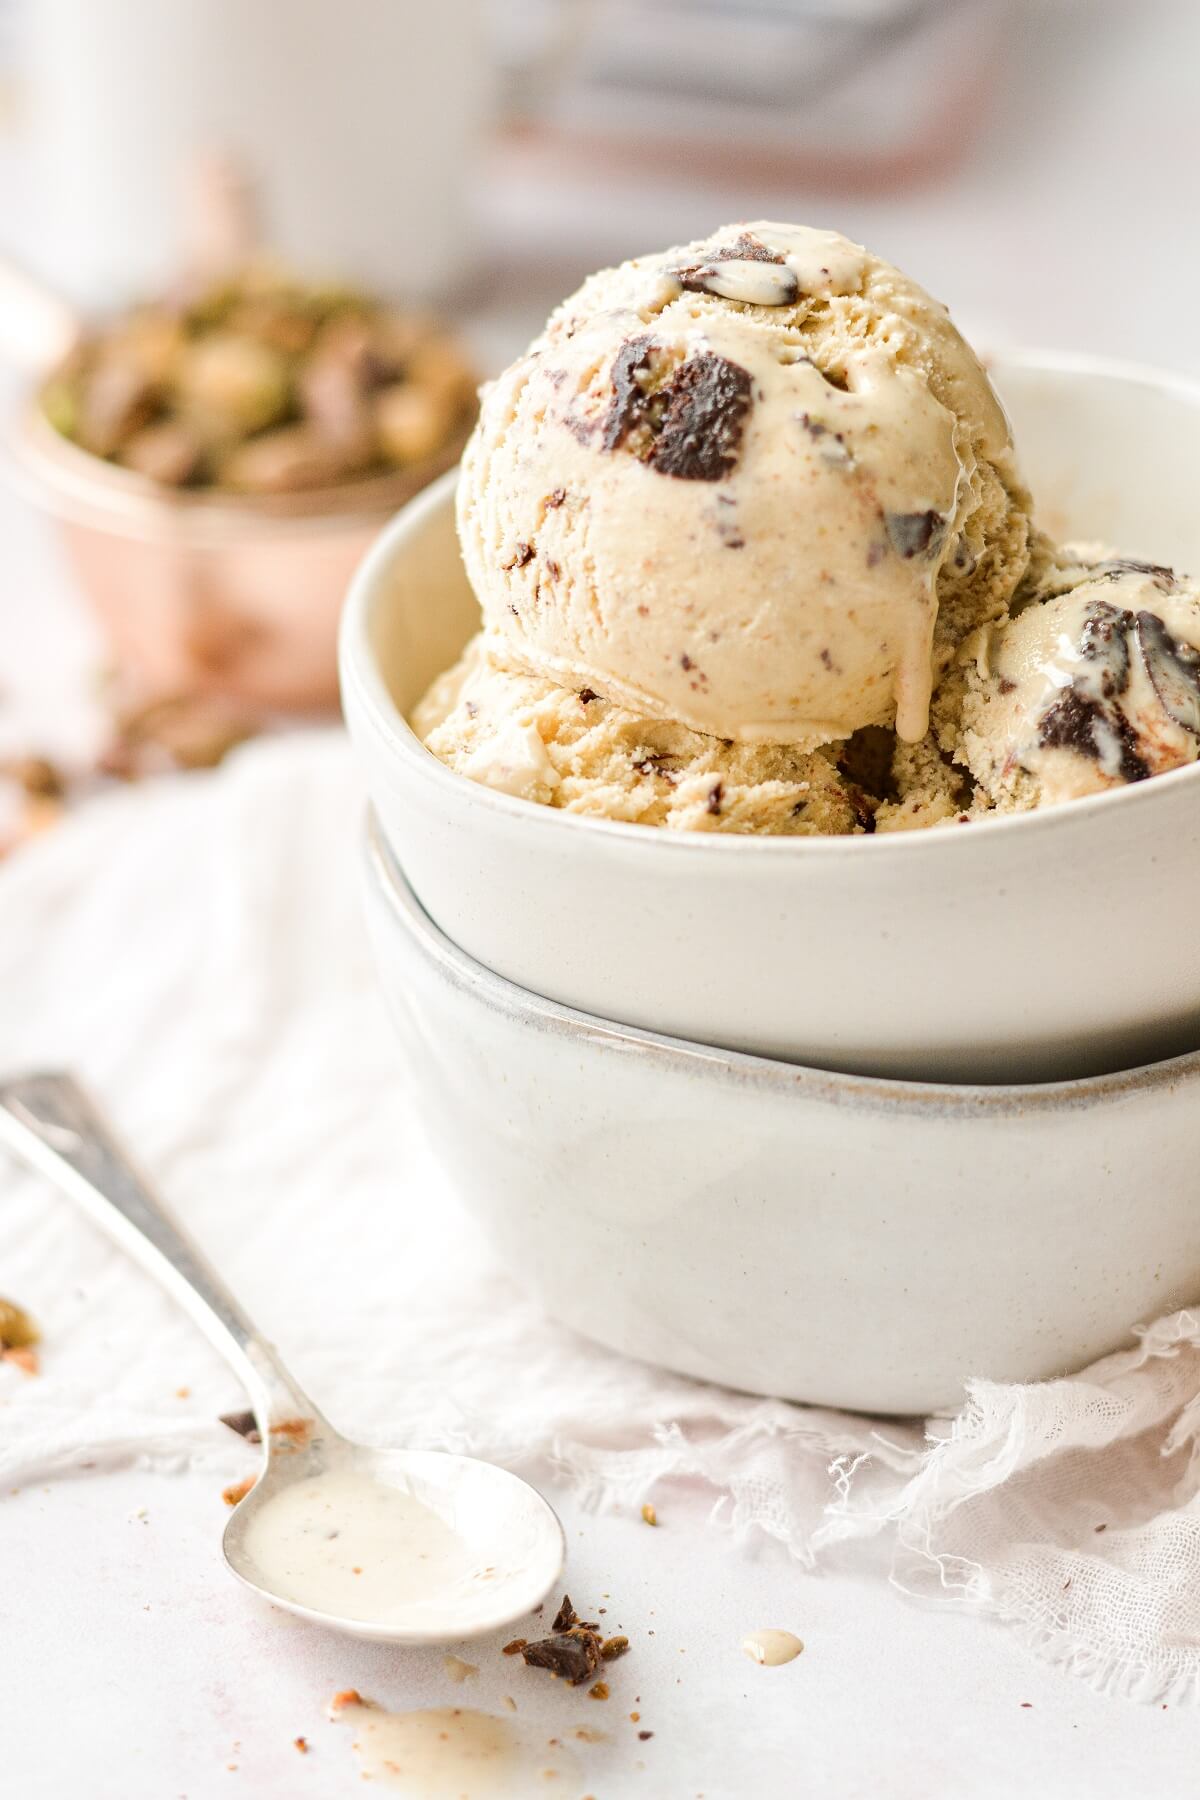 Pistachio browni chunk ice cream, next to a spoon dripping with ice cream.